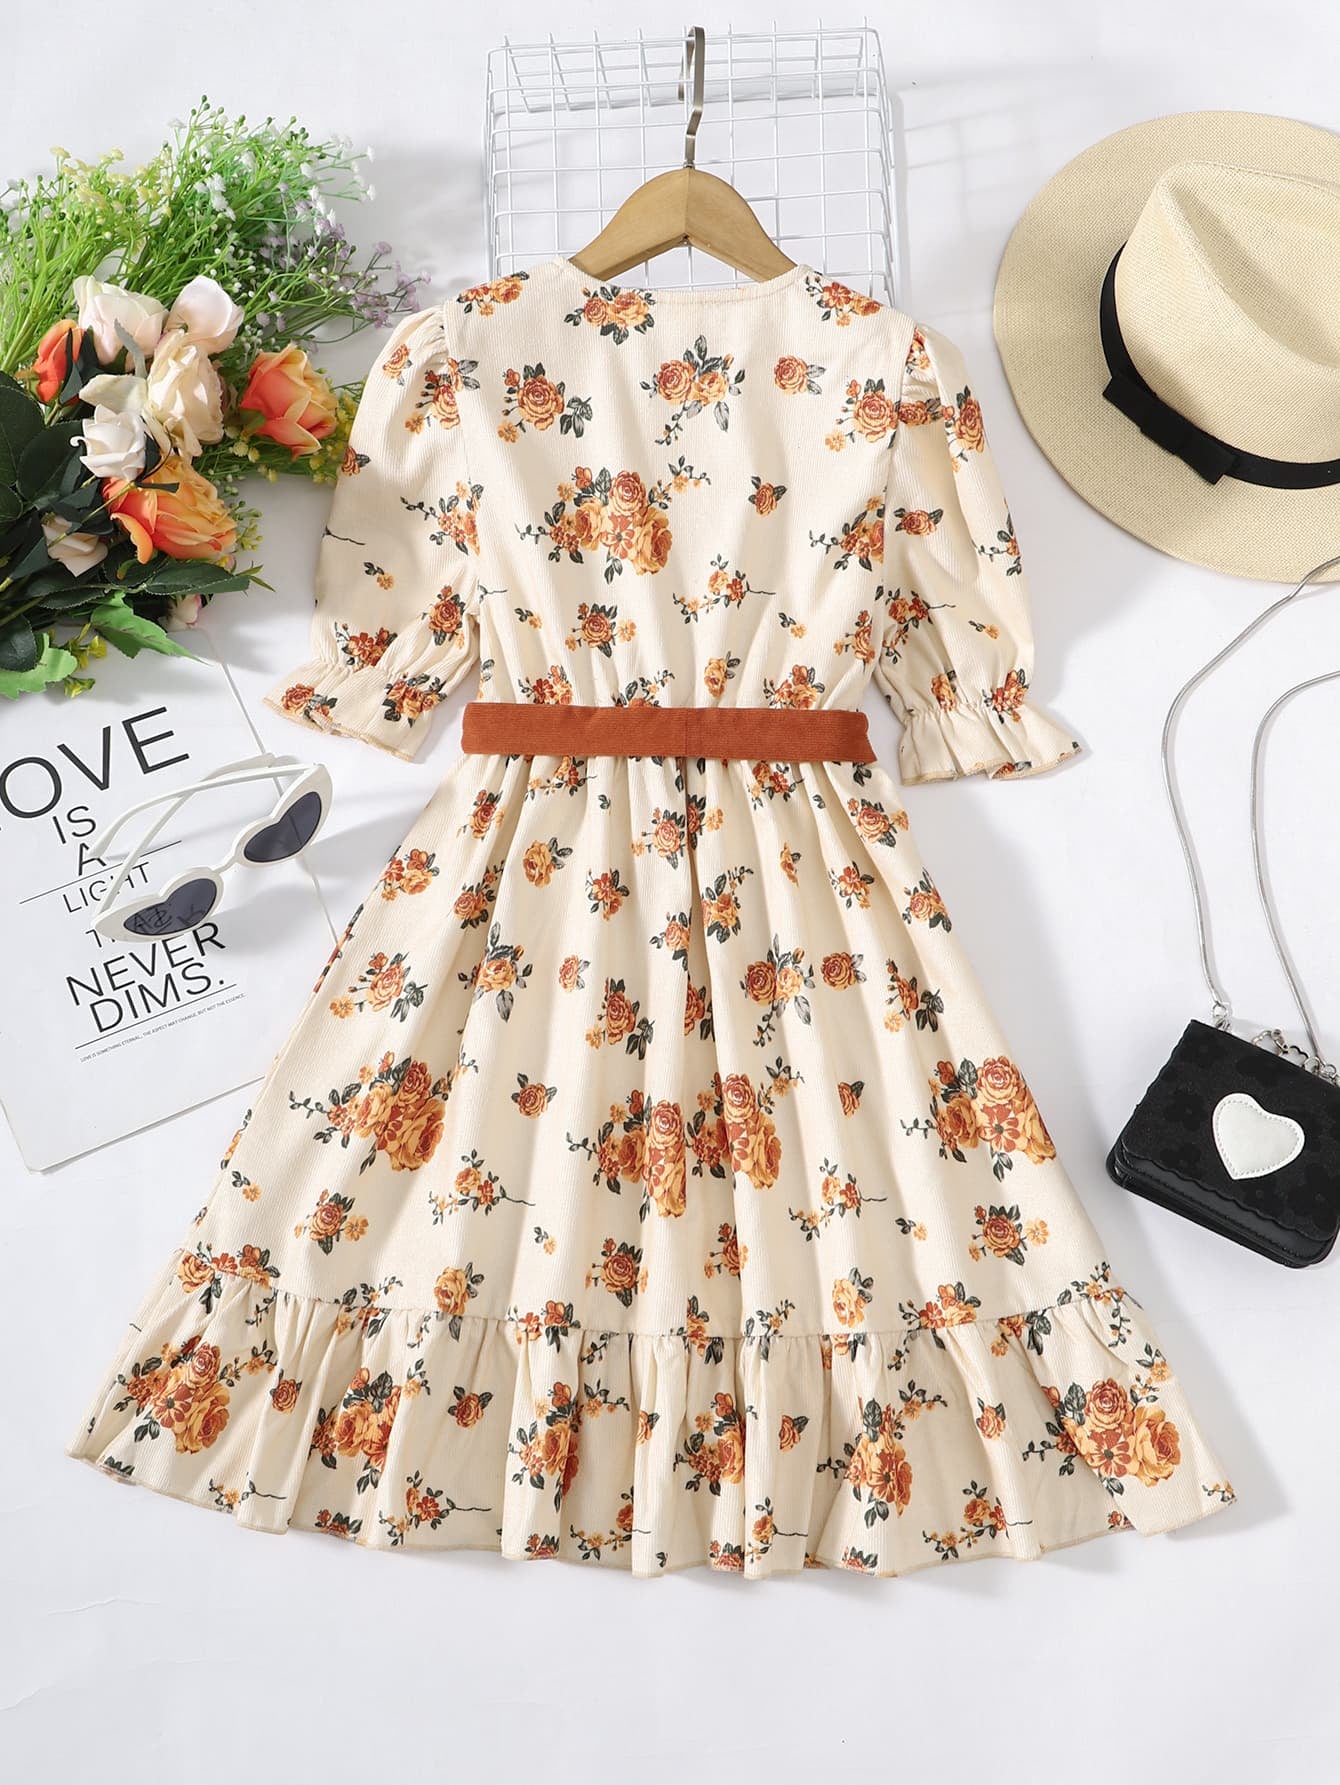 Girls Floral Tied Puff Sleeve Dress, Age: 8 - 12 years old